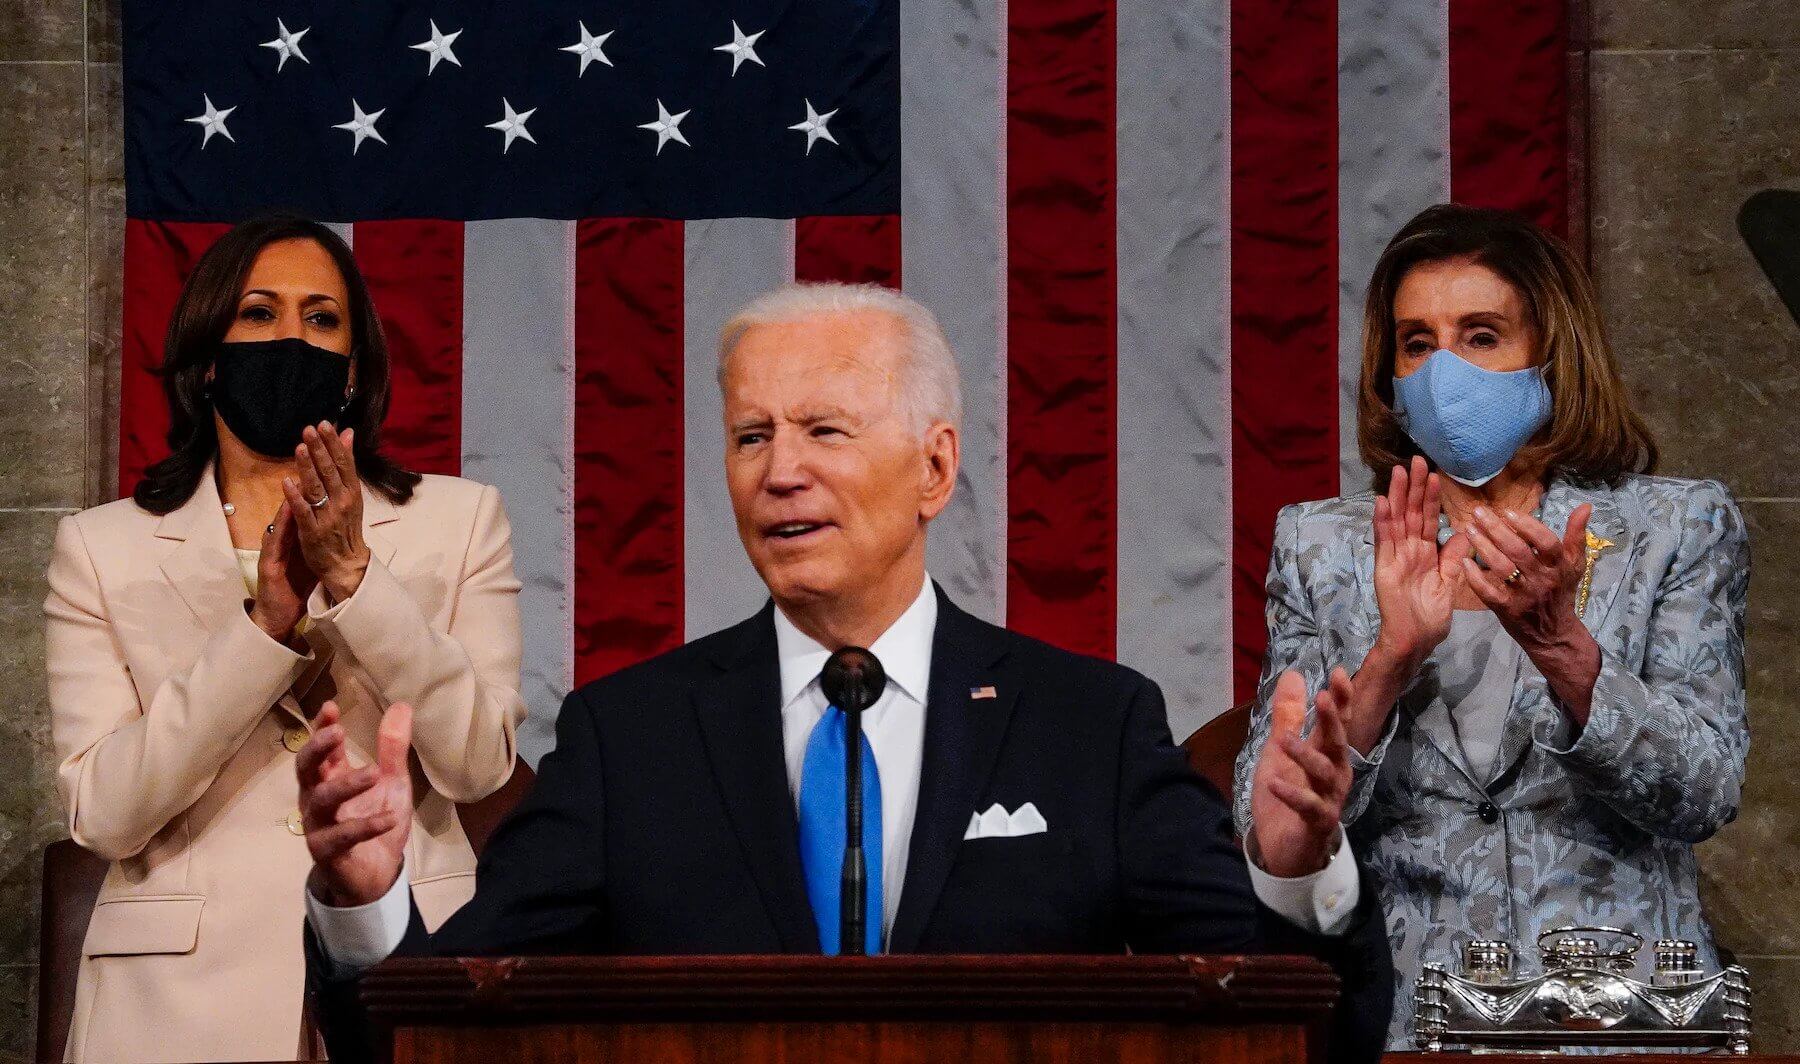 Biden Takes Tough Stance on China and Russia in First Joint Address to Congress